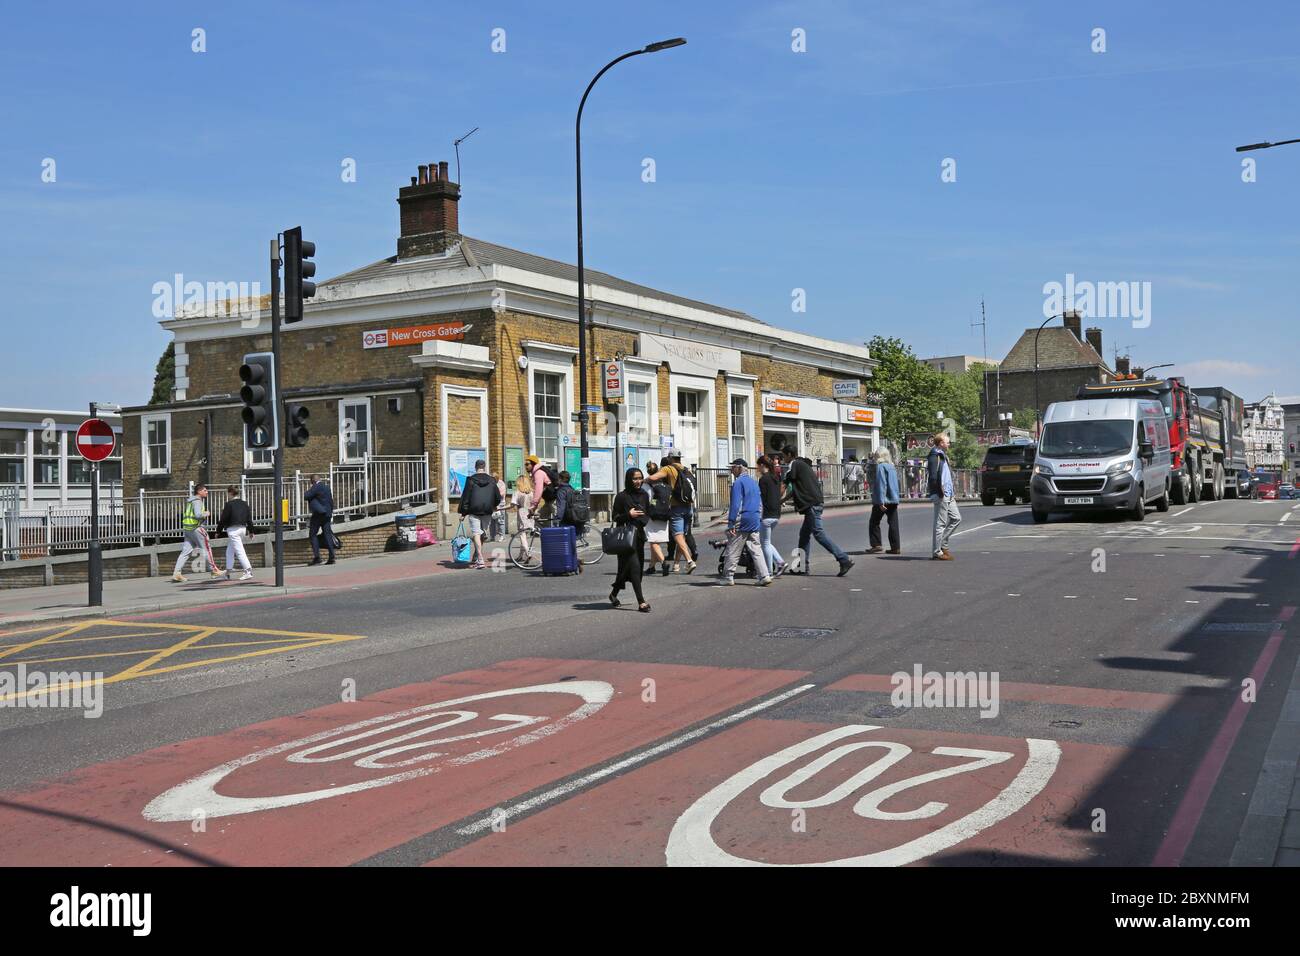 New Cross Gate Railway Station in south east London, UK. Shows pedestrians crossing the busy A2 trunk road. Stock Photo